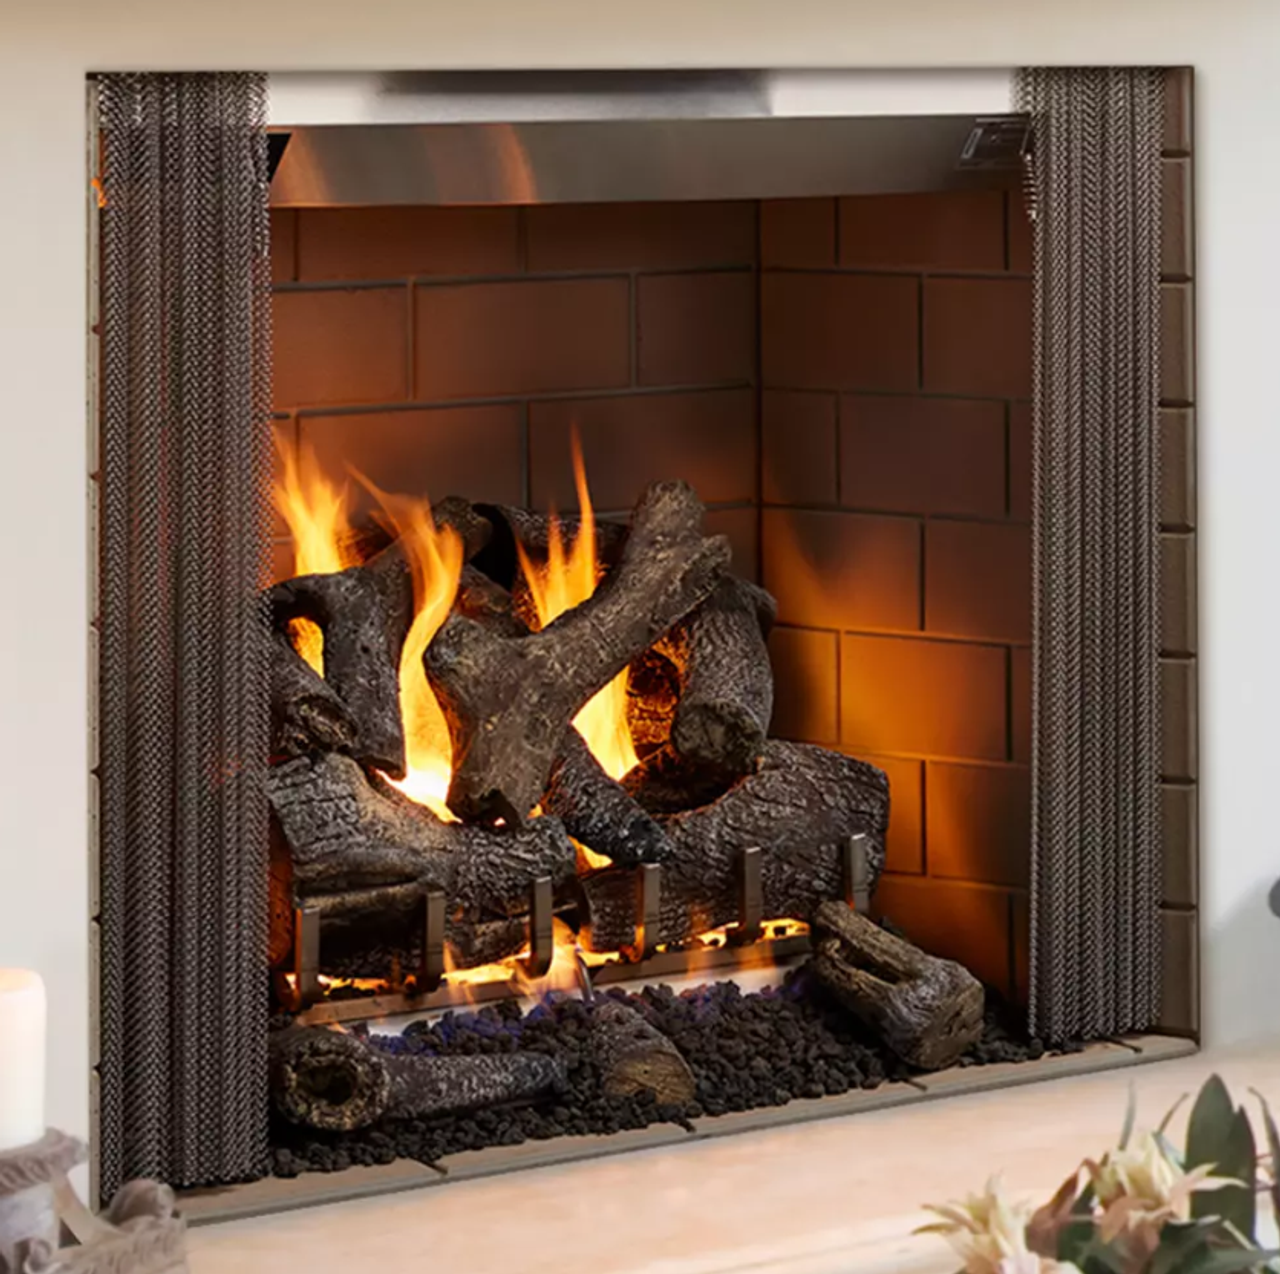 Castlewood 42" Outdoor Wood Burning Fireplace